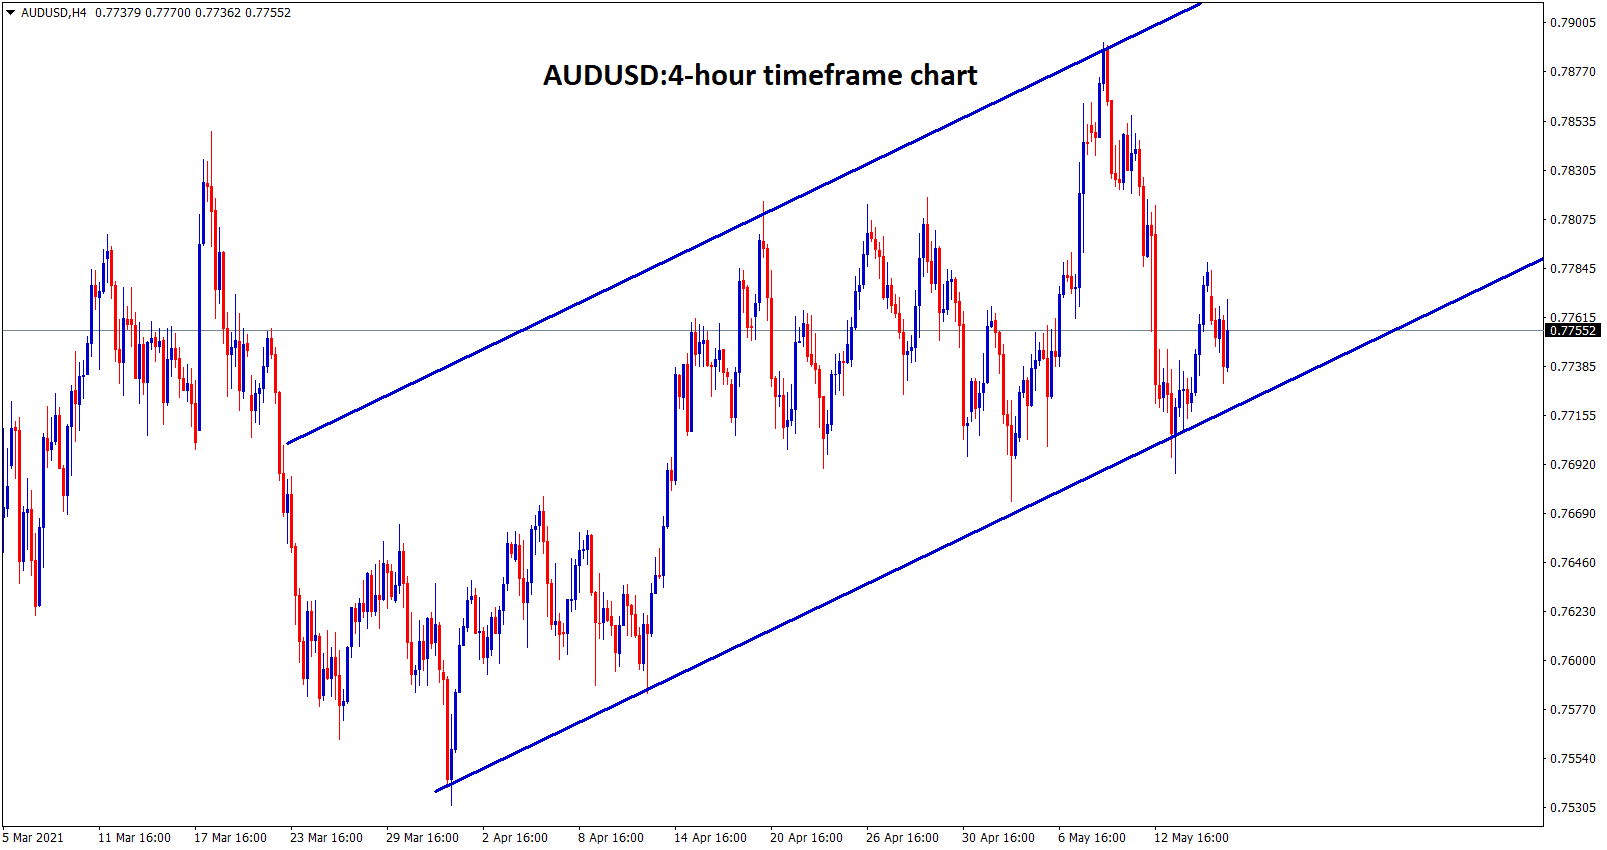 AUDUSD is moving in an uptrend range